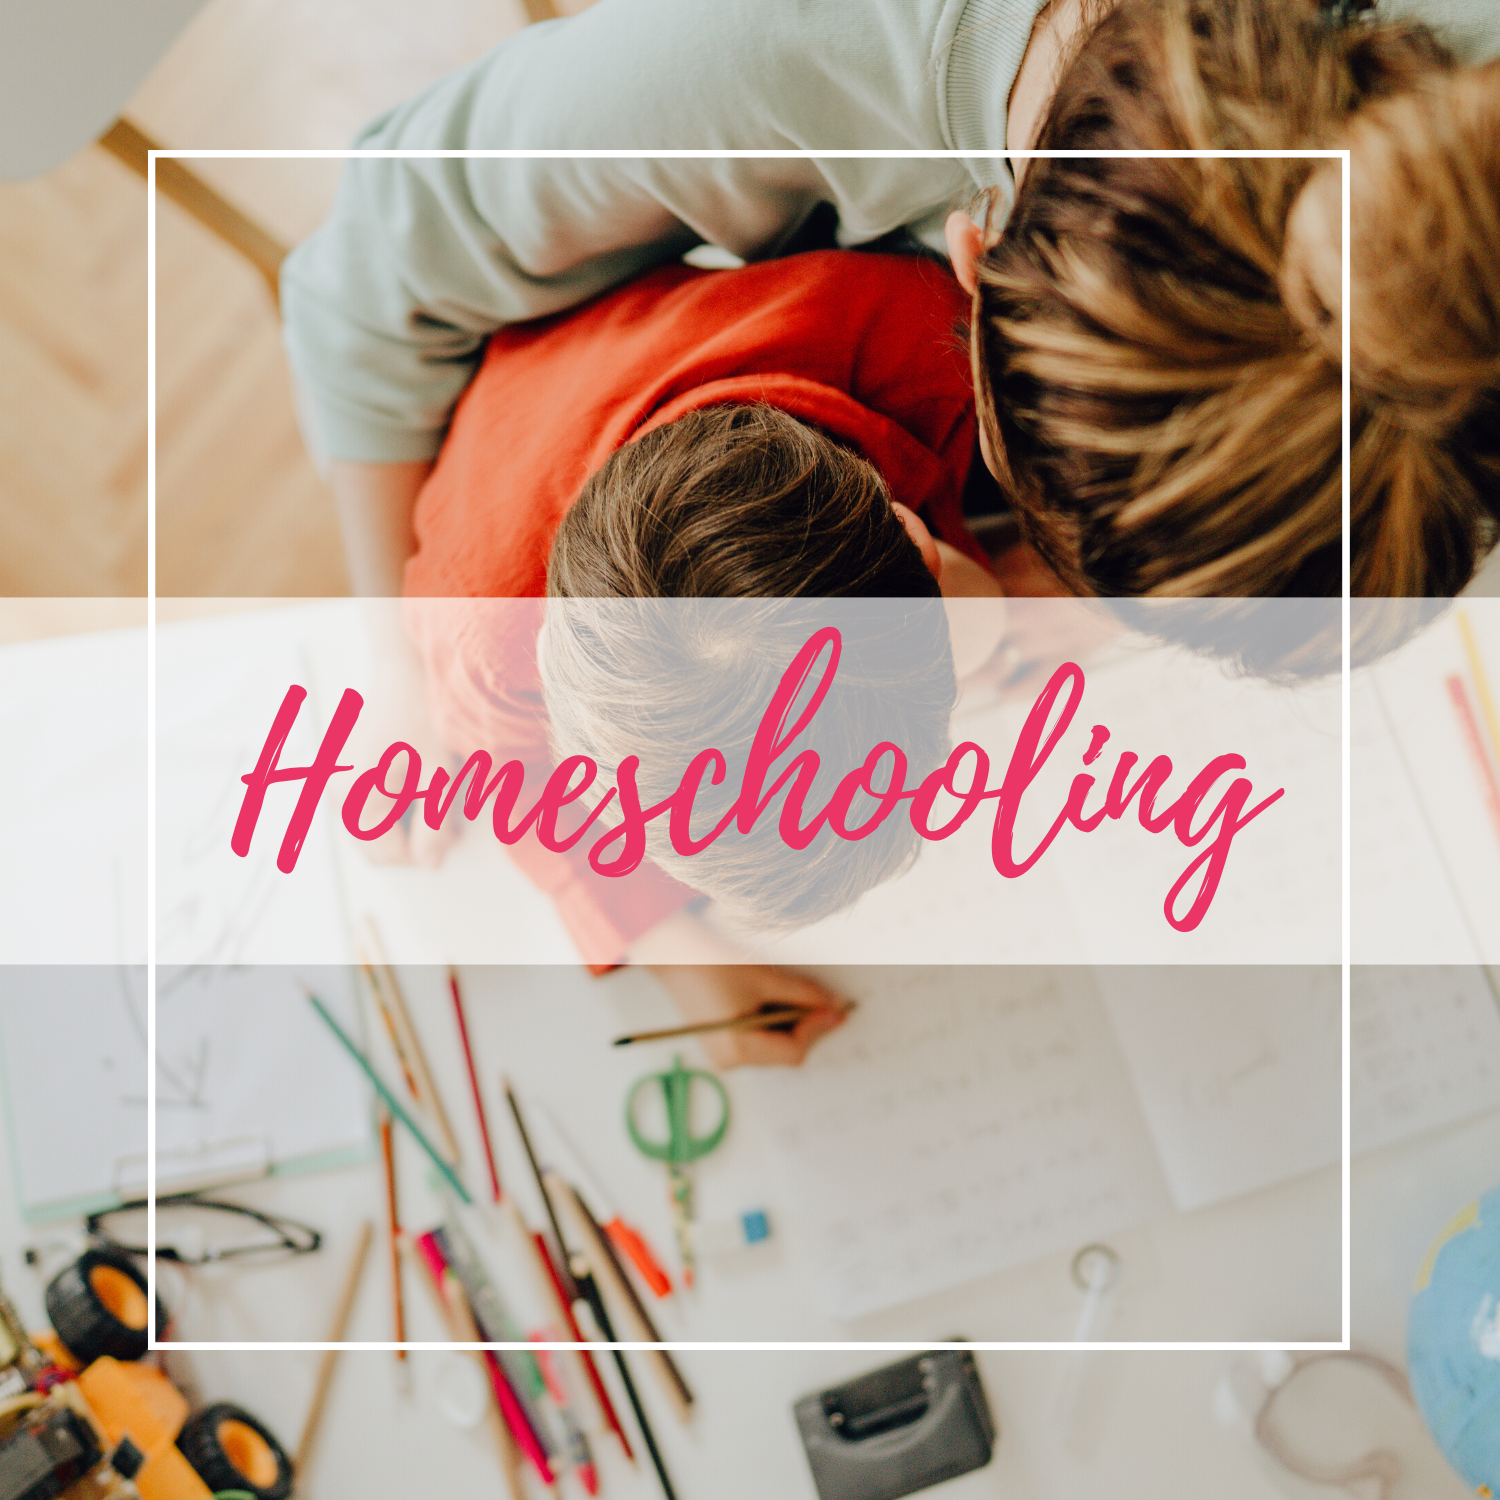 The Homeschooling Bundle to help you raise children who succeed and love the Lord